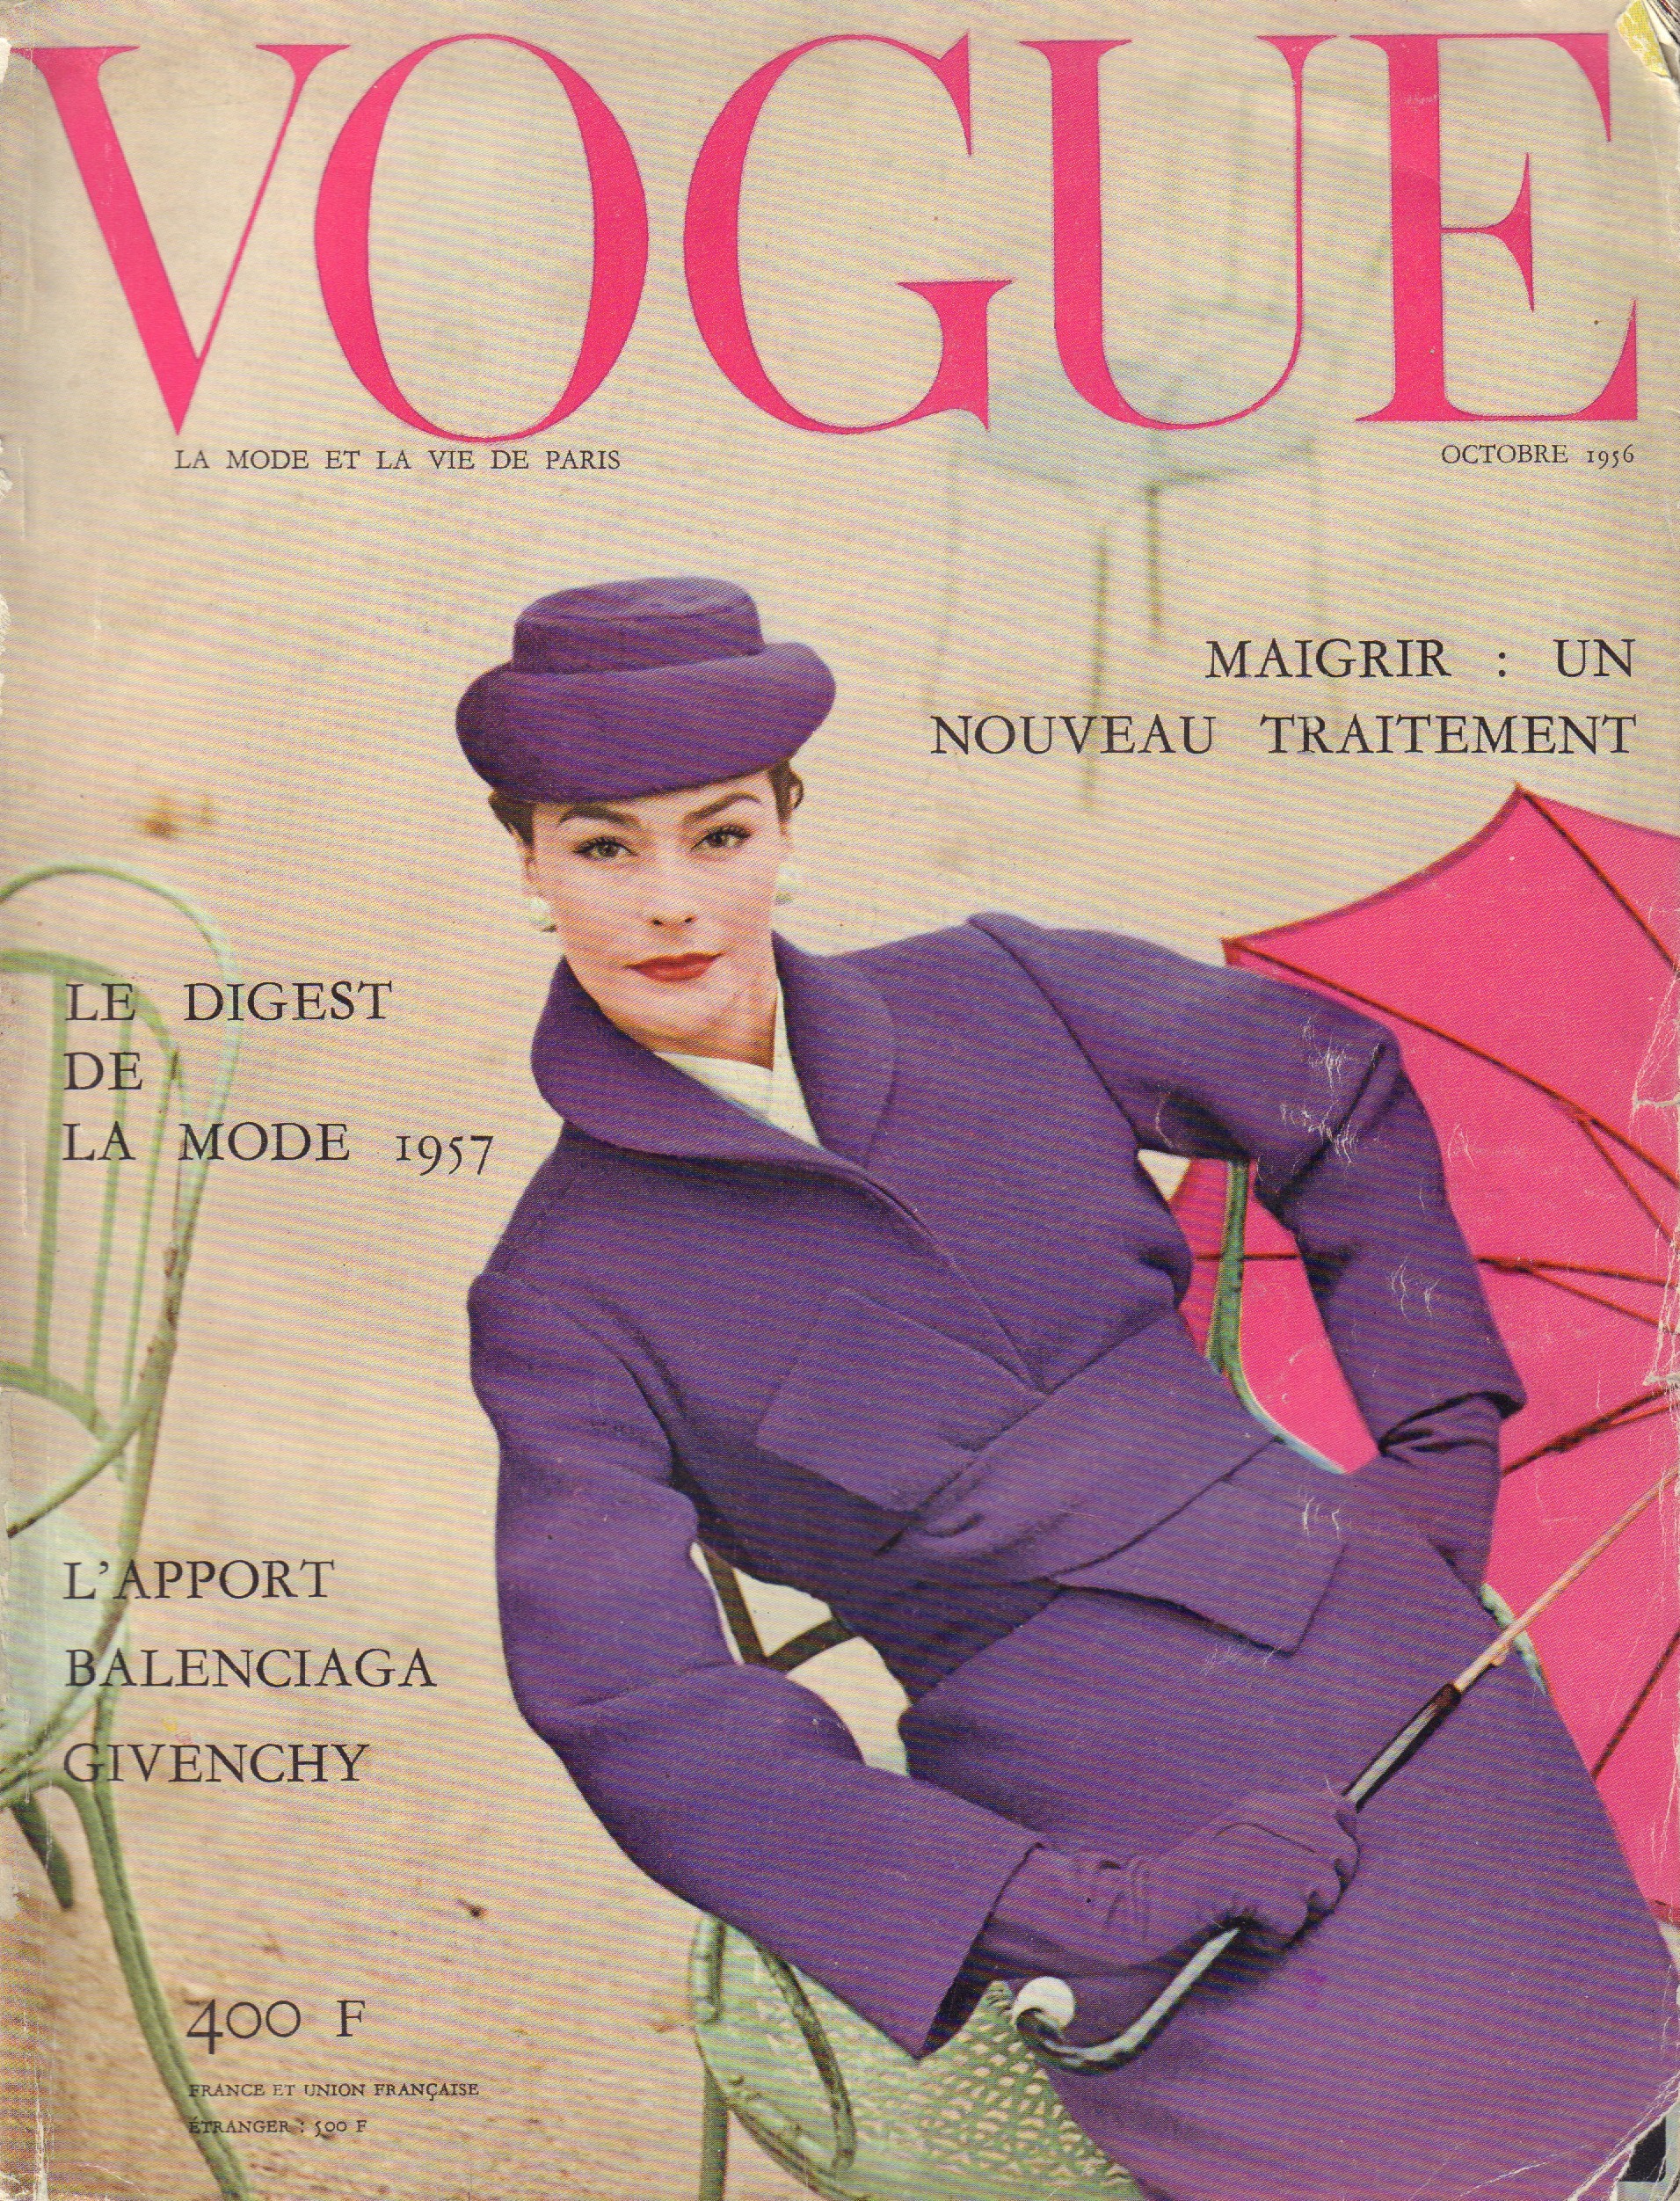 Image for Vogue Octobre 1956 - French edition (October)